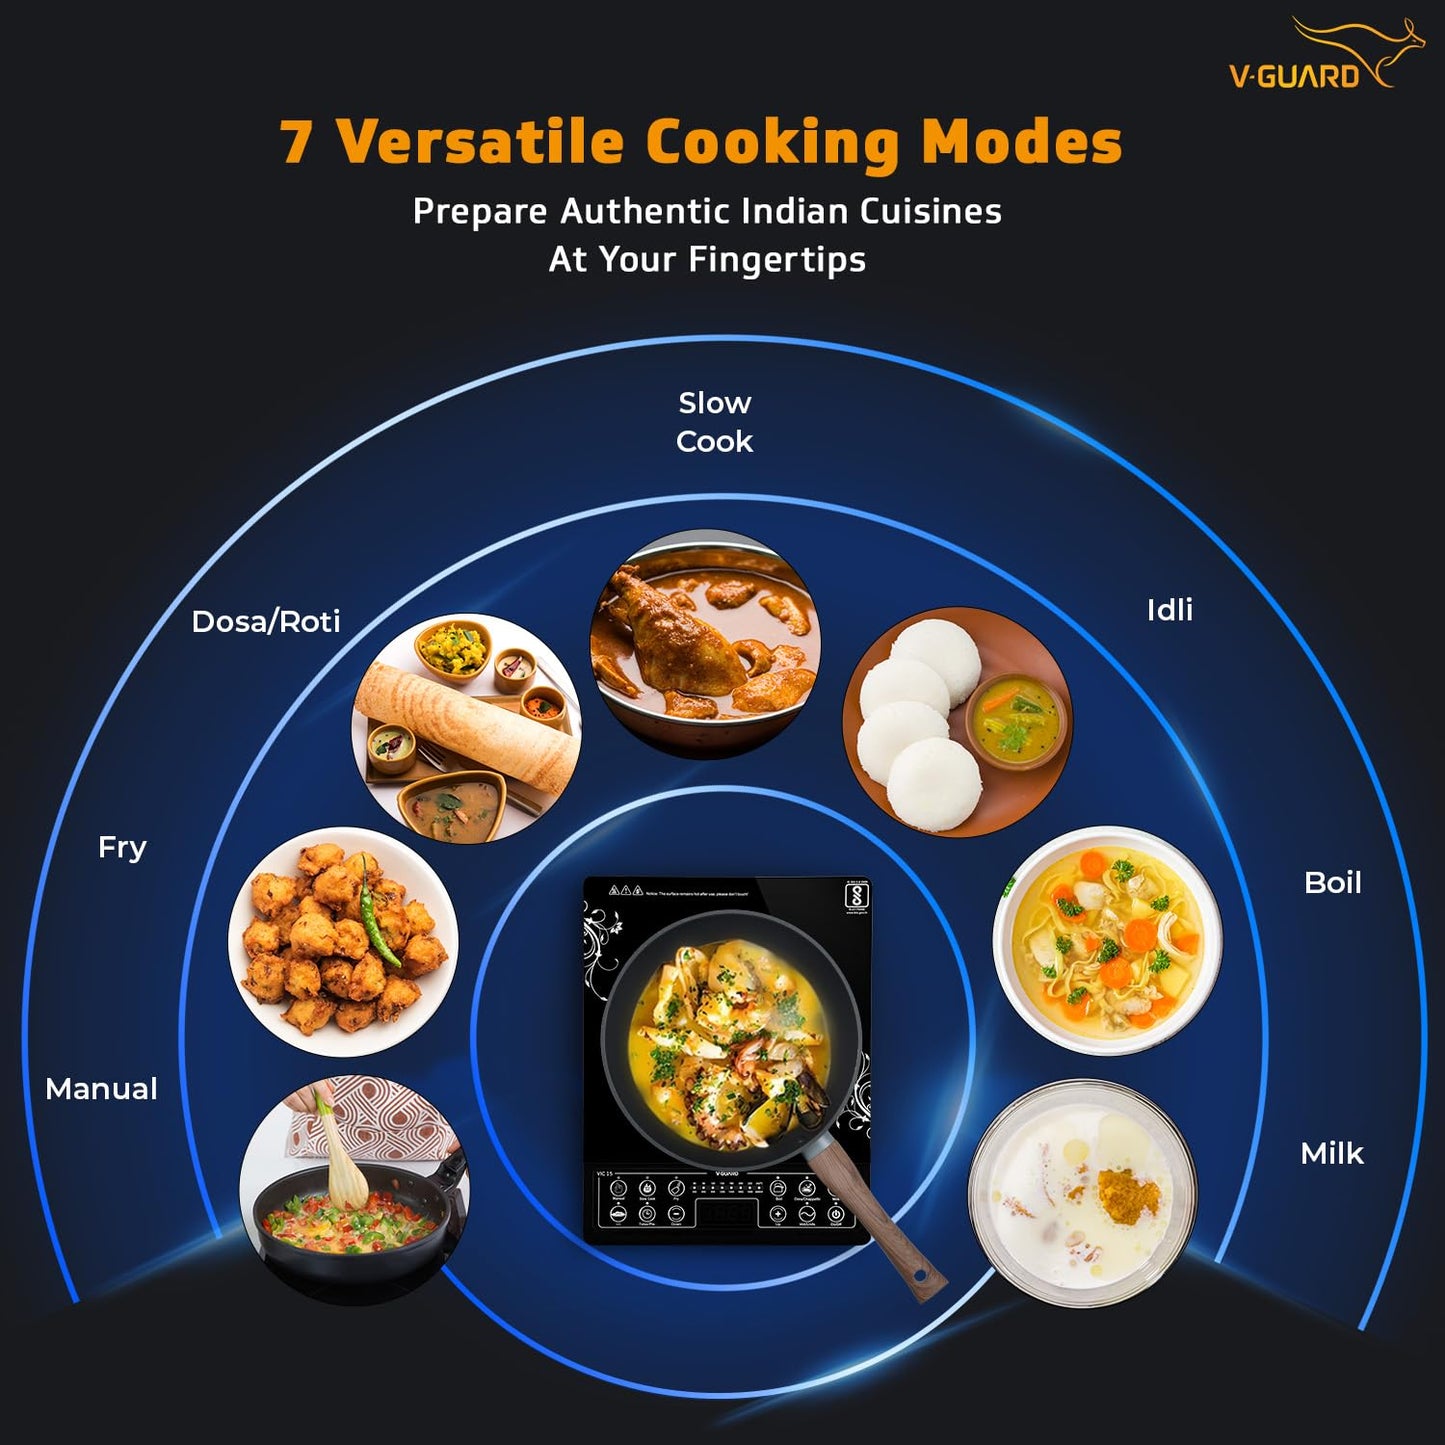 VIC 15 2000 Watt Induction Cooktop with 7 versatile cooking modes